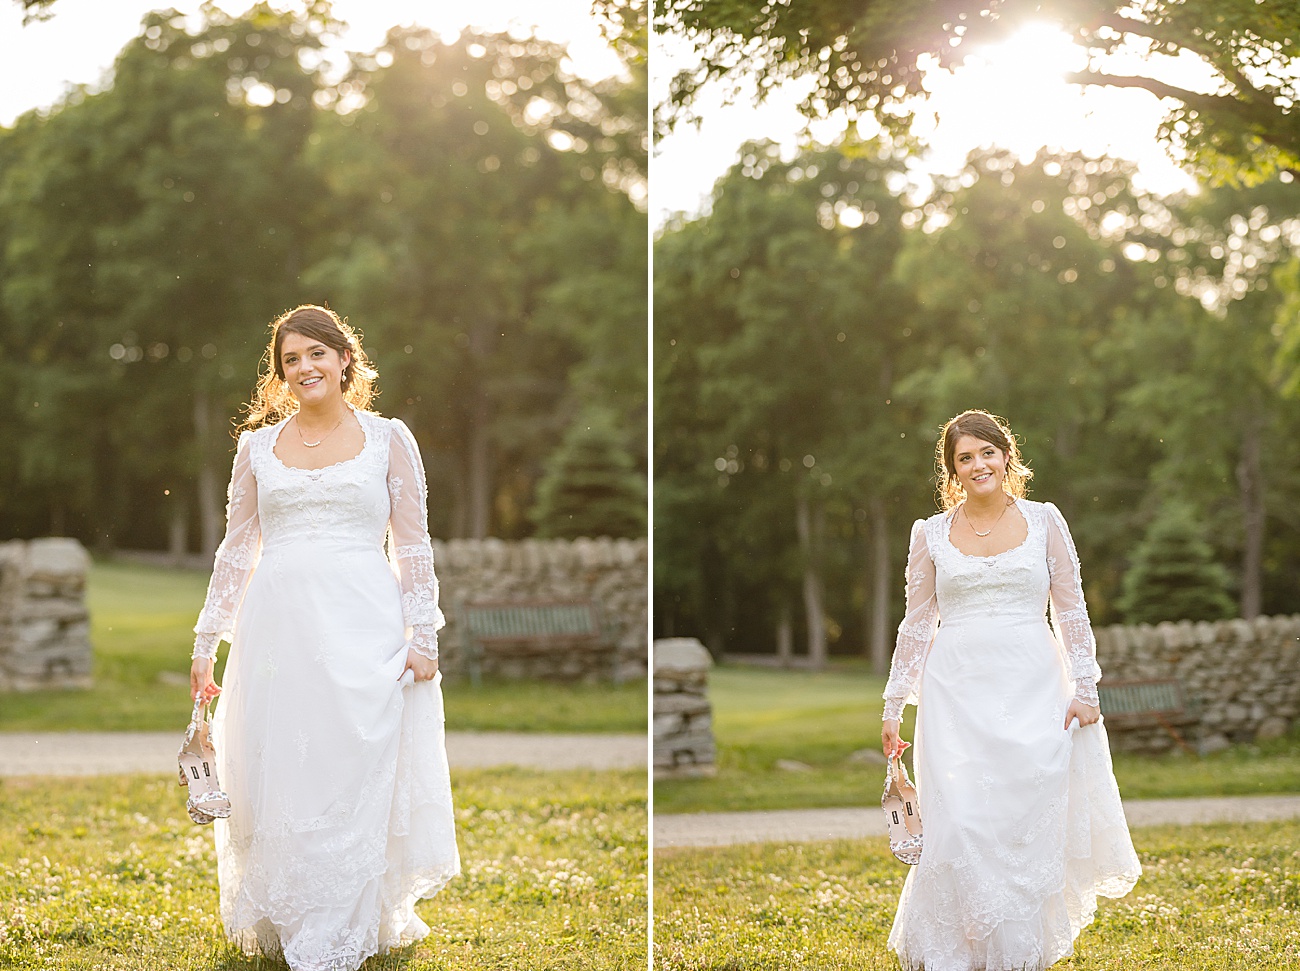 Bride portraits at Parmelee Farm Wedding in Killingworth CT by Jamerlyn Brown Photography